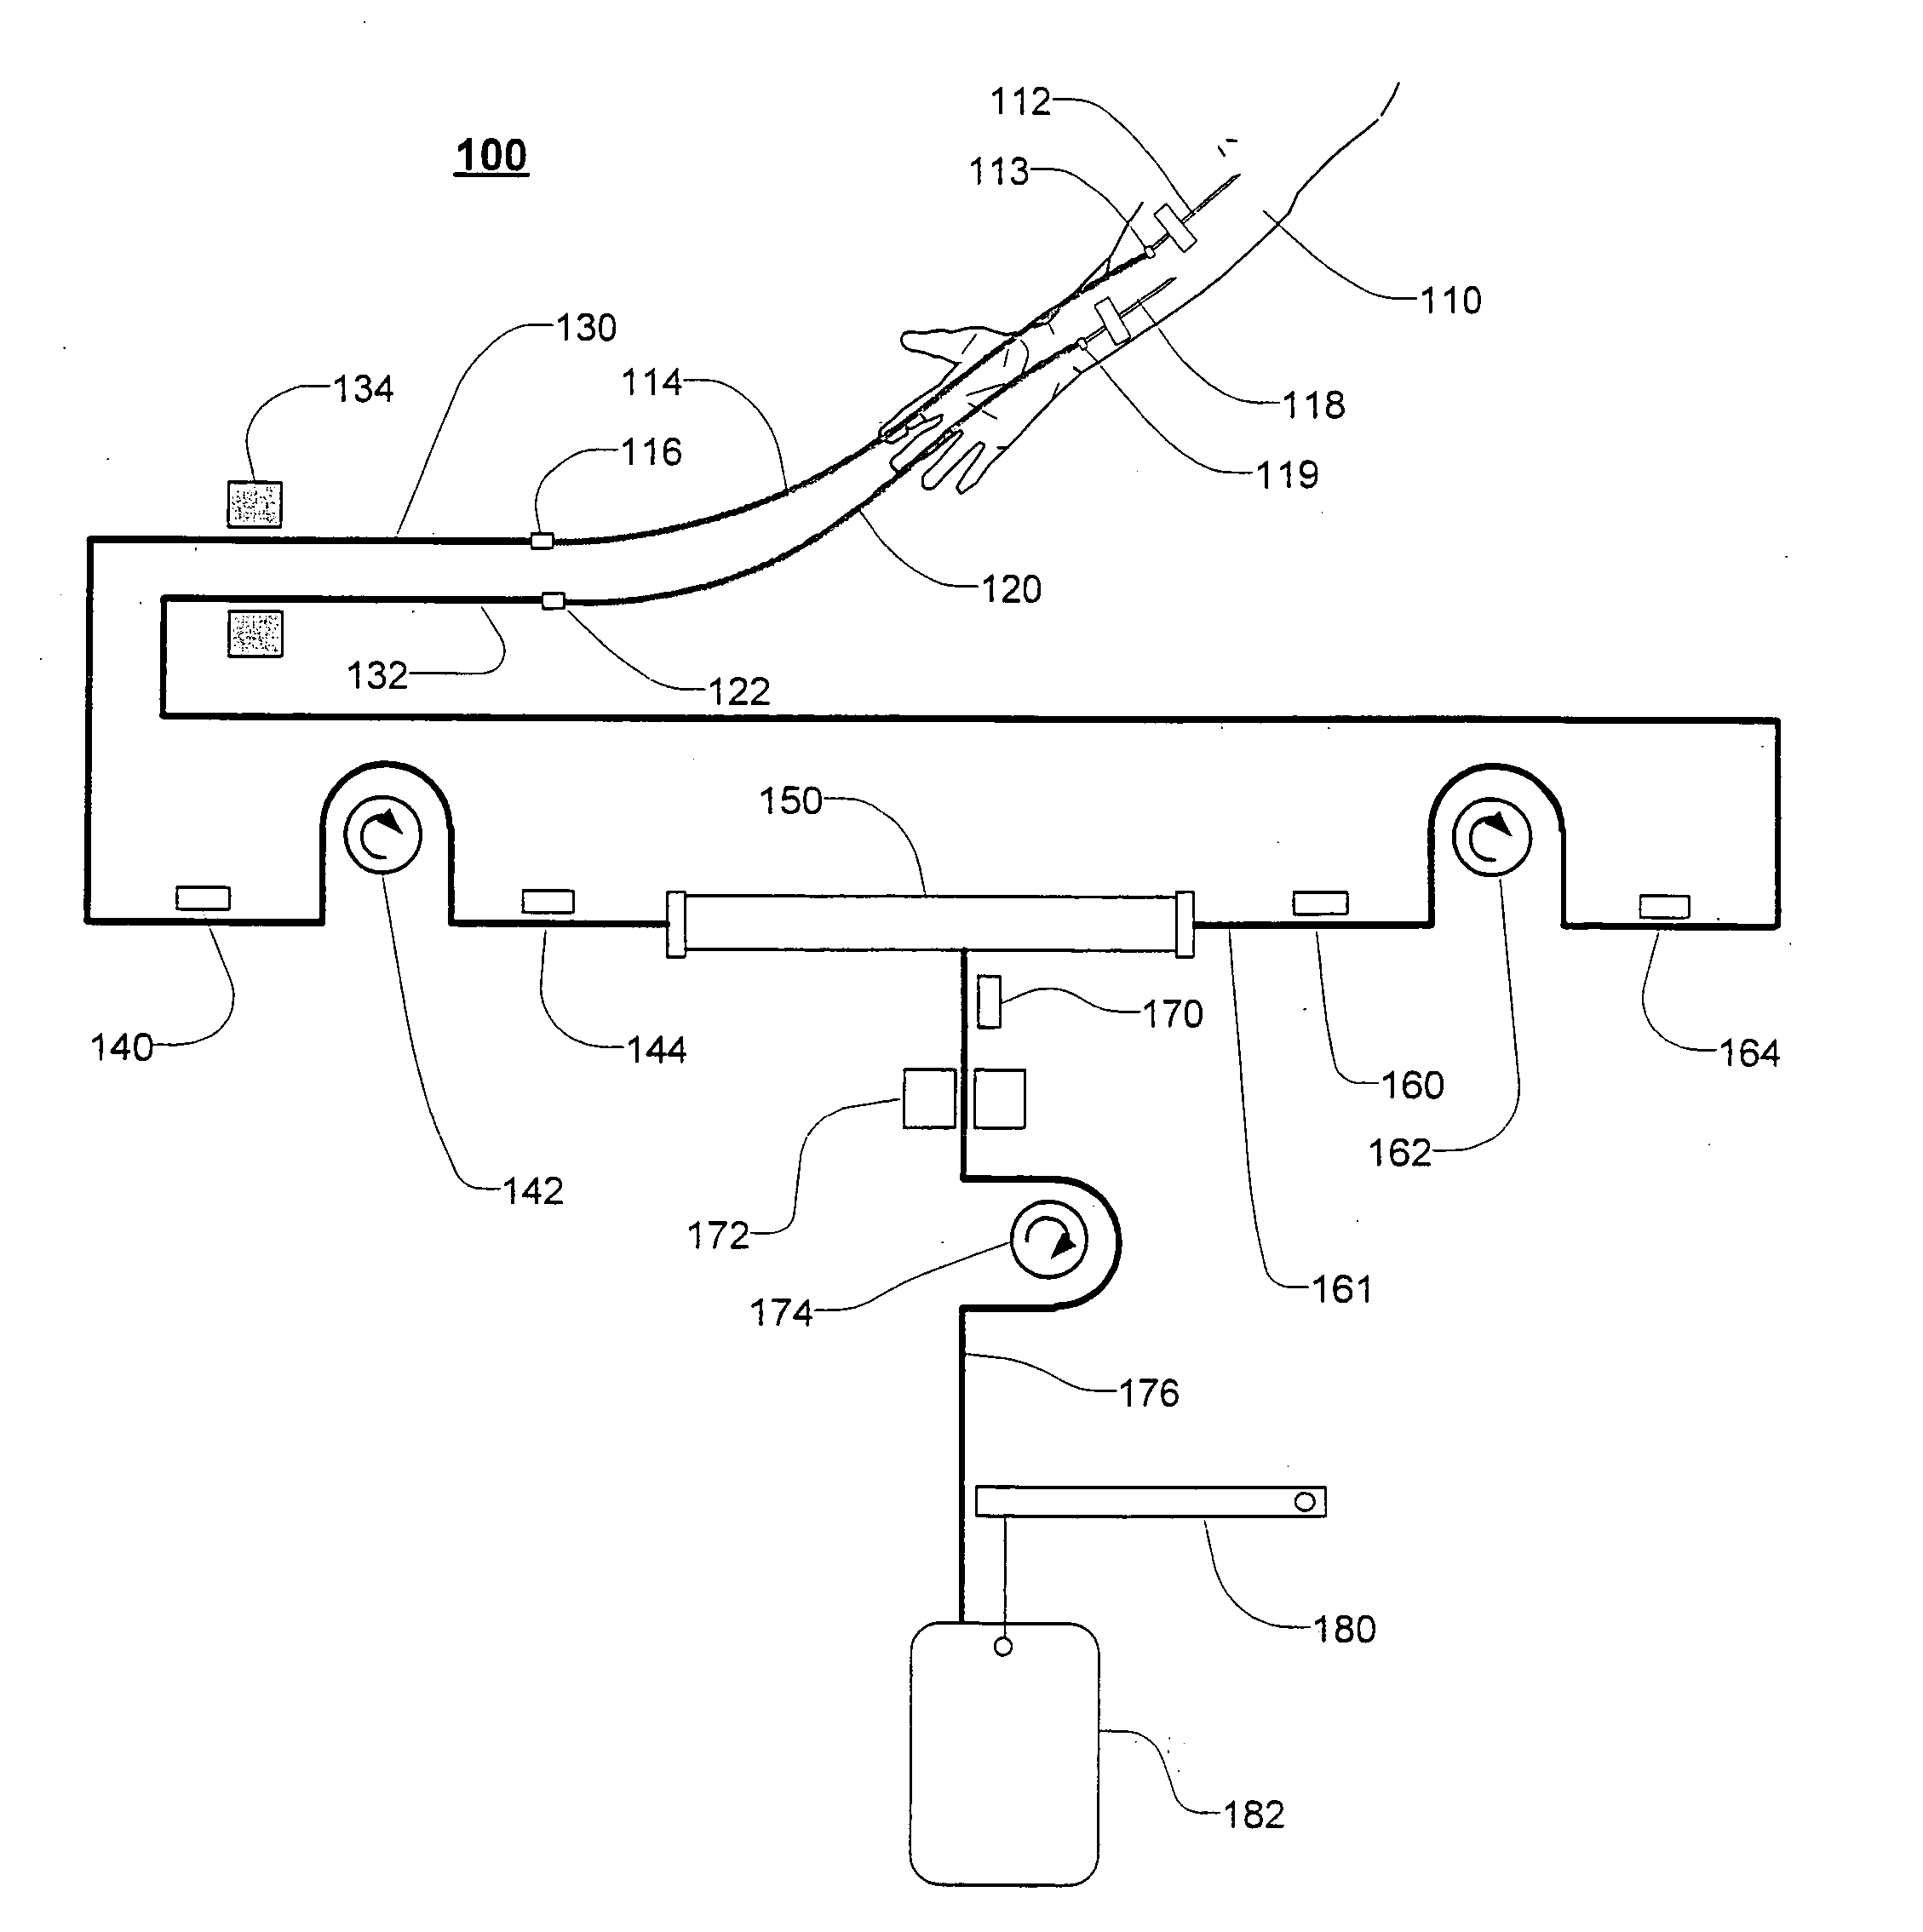 Extracorporeal blood treatment and system having reversible blood pumps